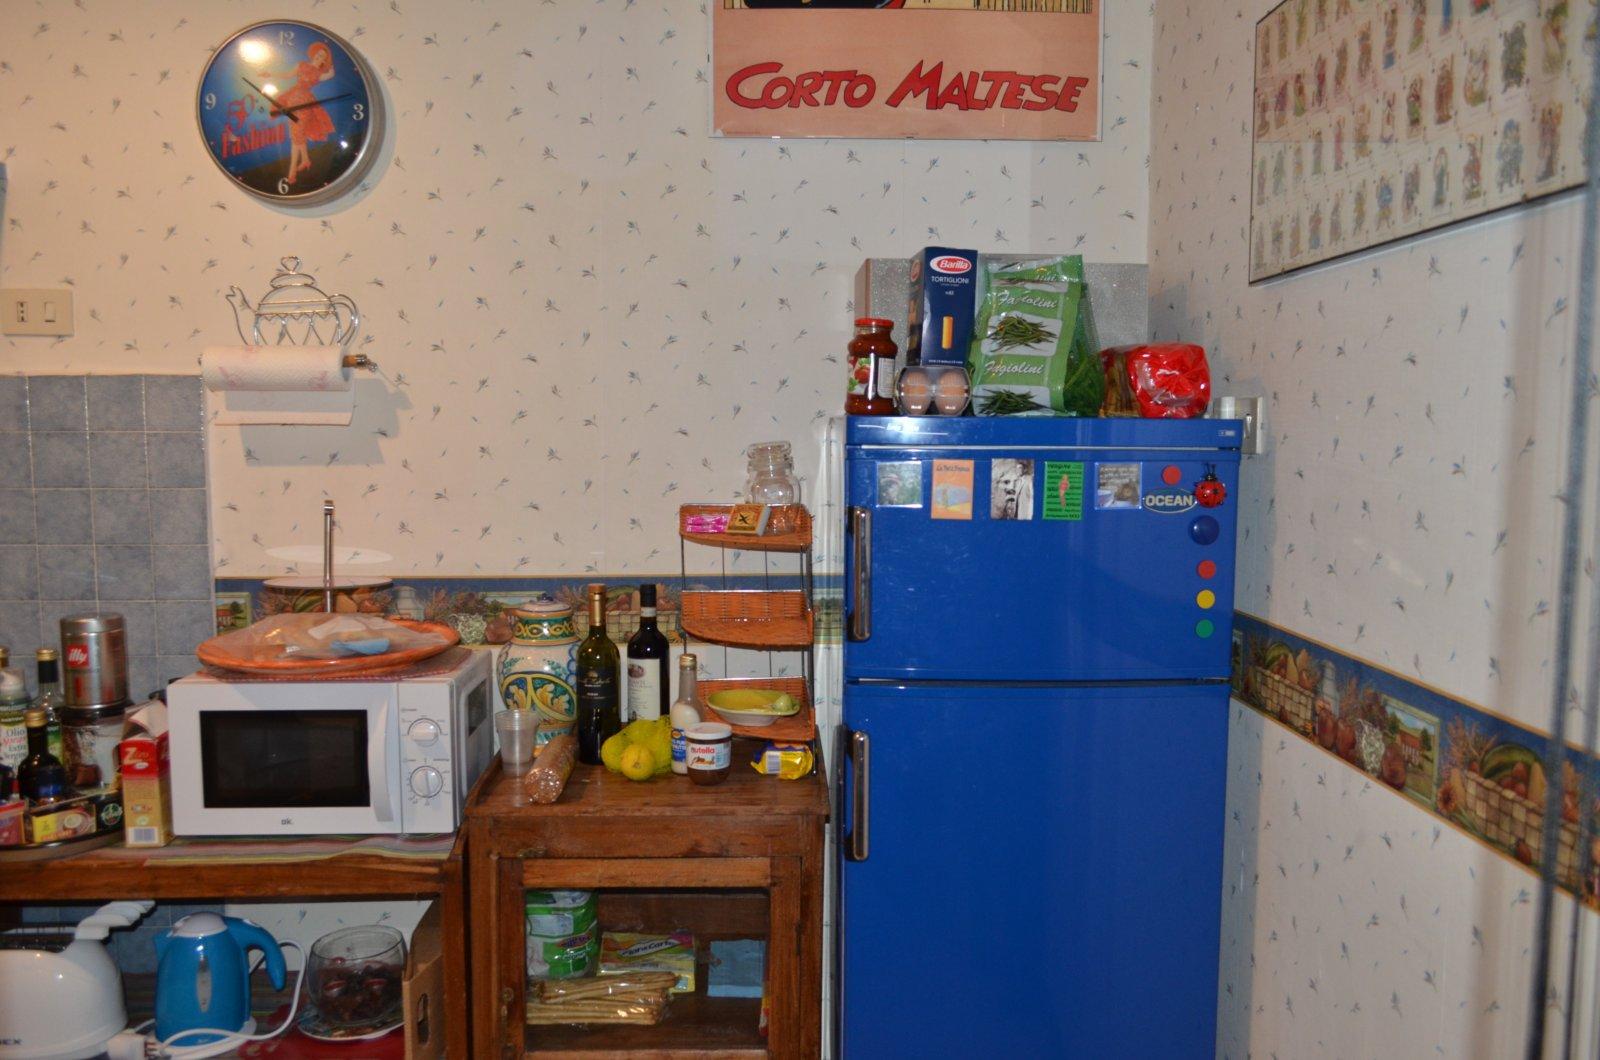 Grandma likes a cluttered kitchen.